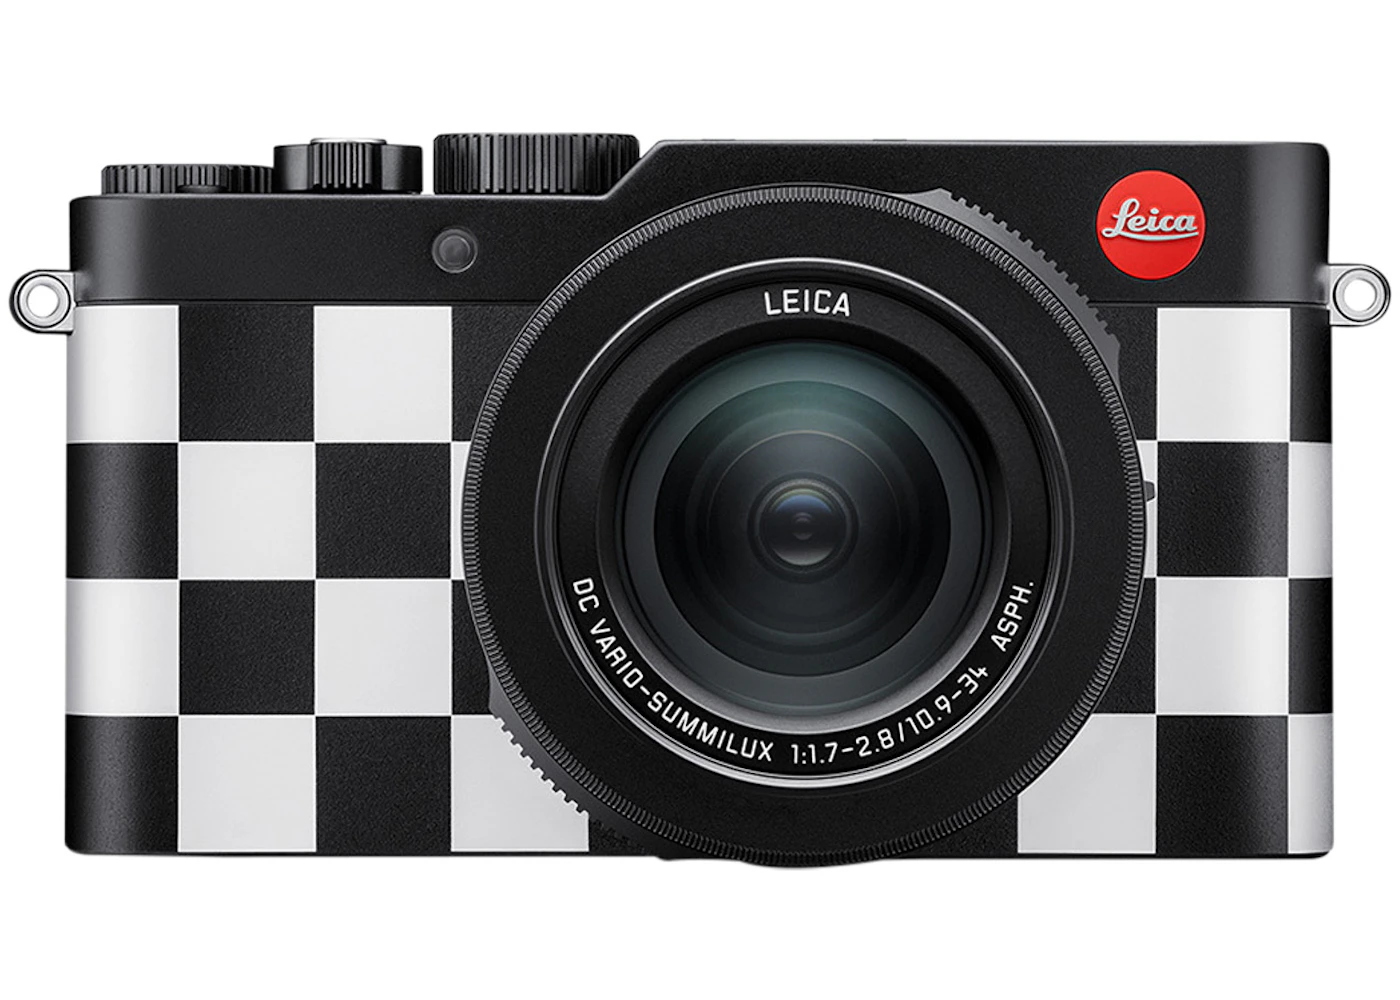 Leica D-Lux 7 Vans x Ray Barbee Edition 19171 - US